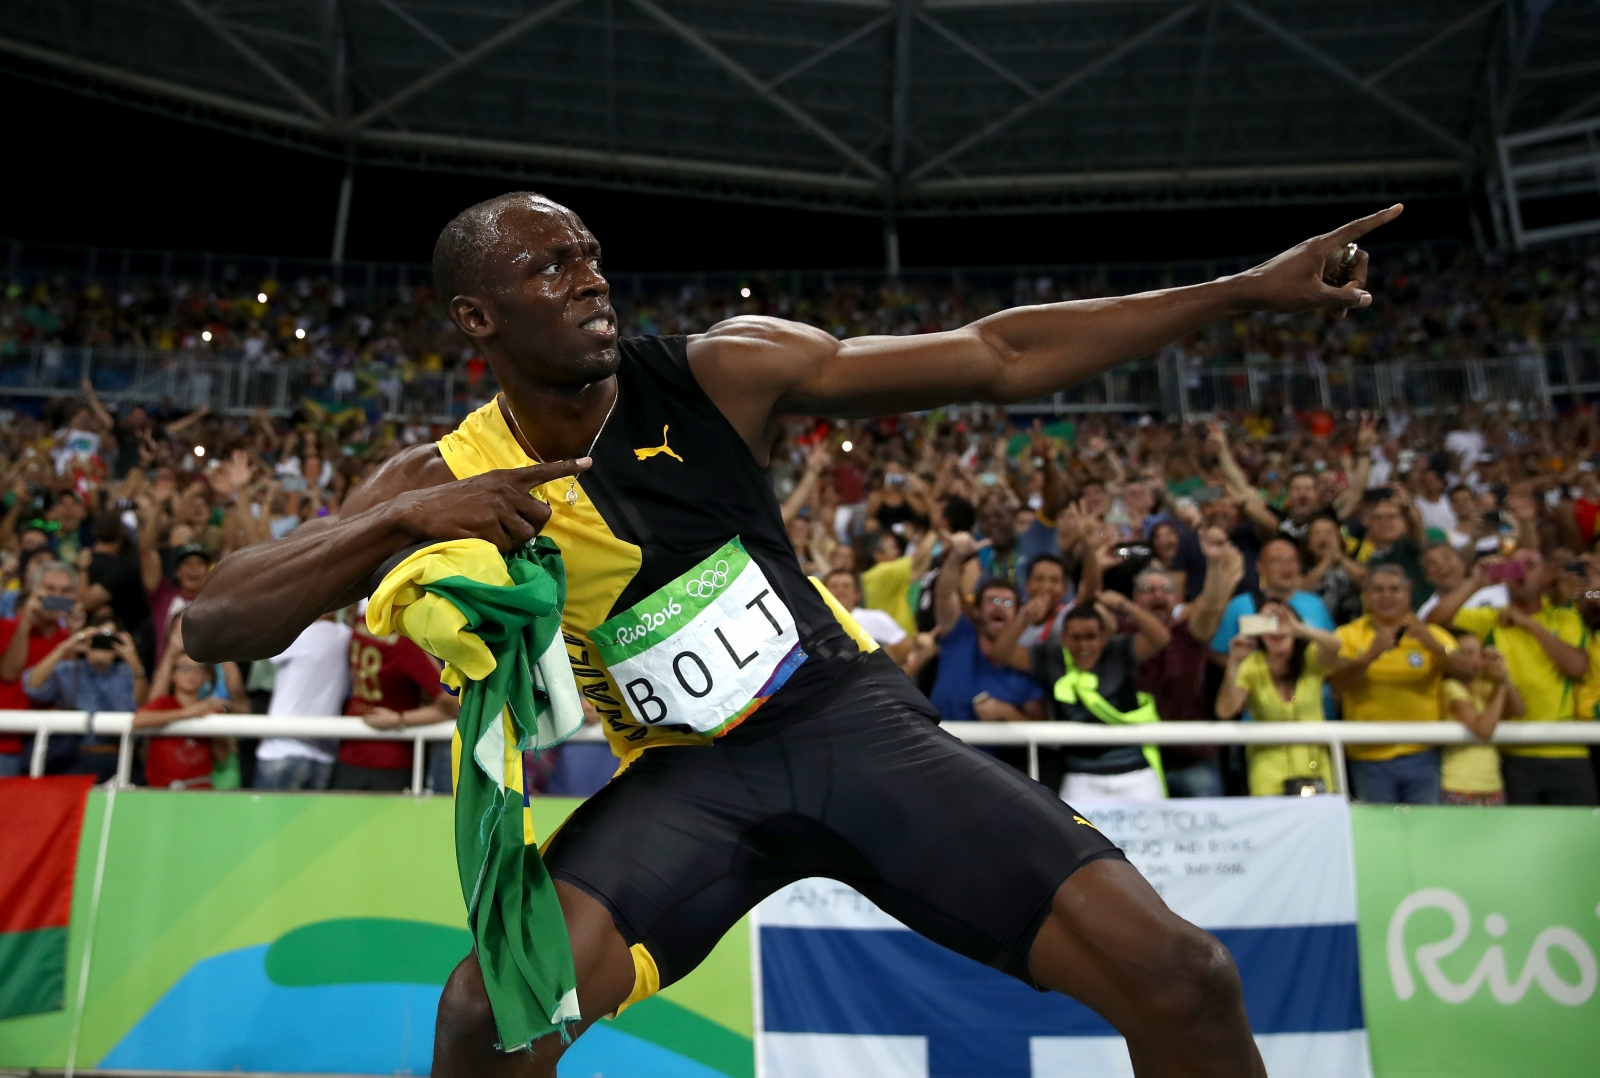 Who is Usain Bolt? Net worth and facts about the Olympic sprint legend1600 x 1078